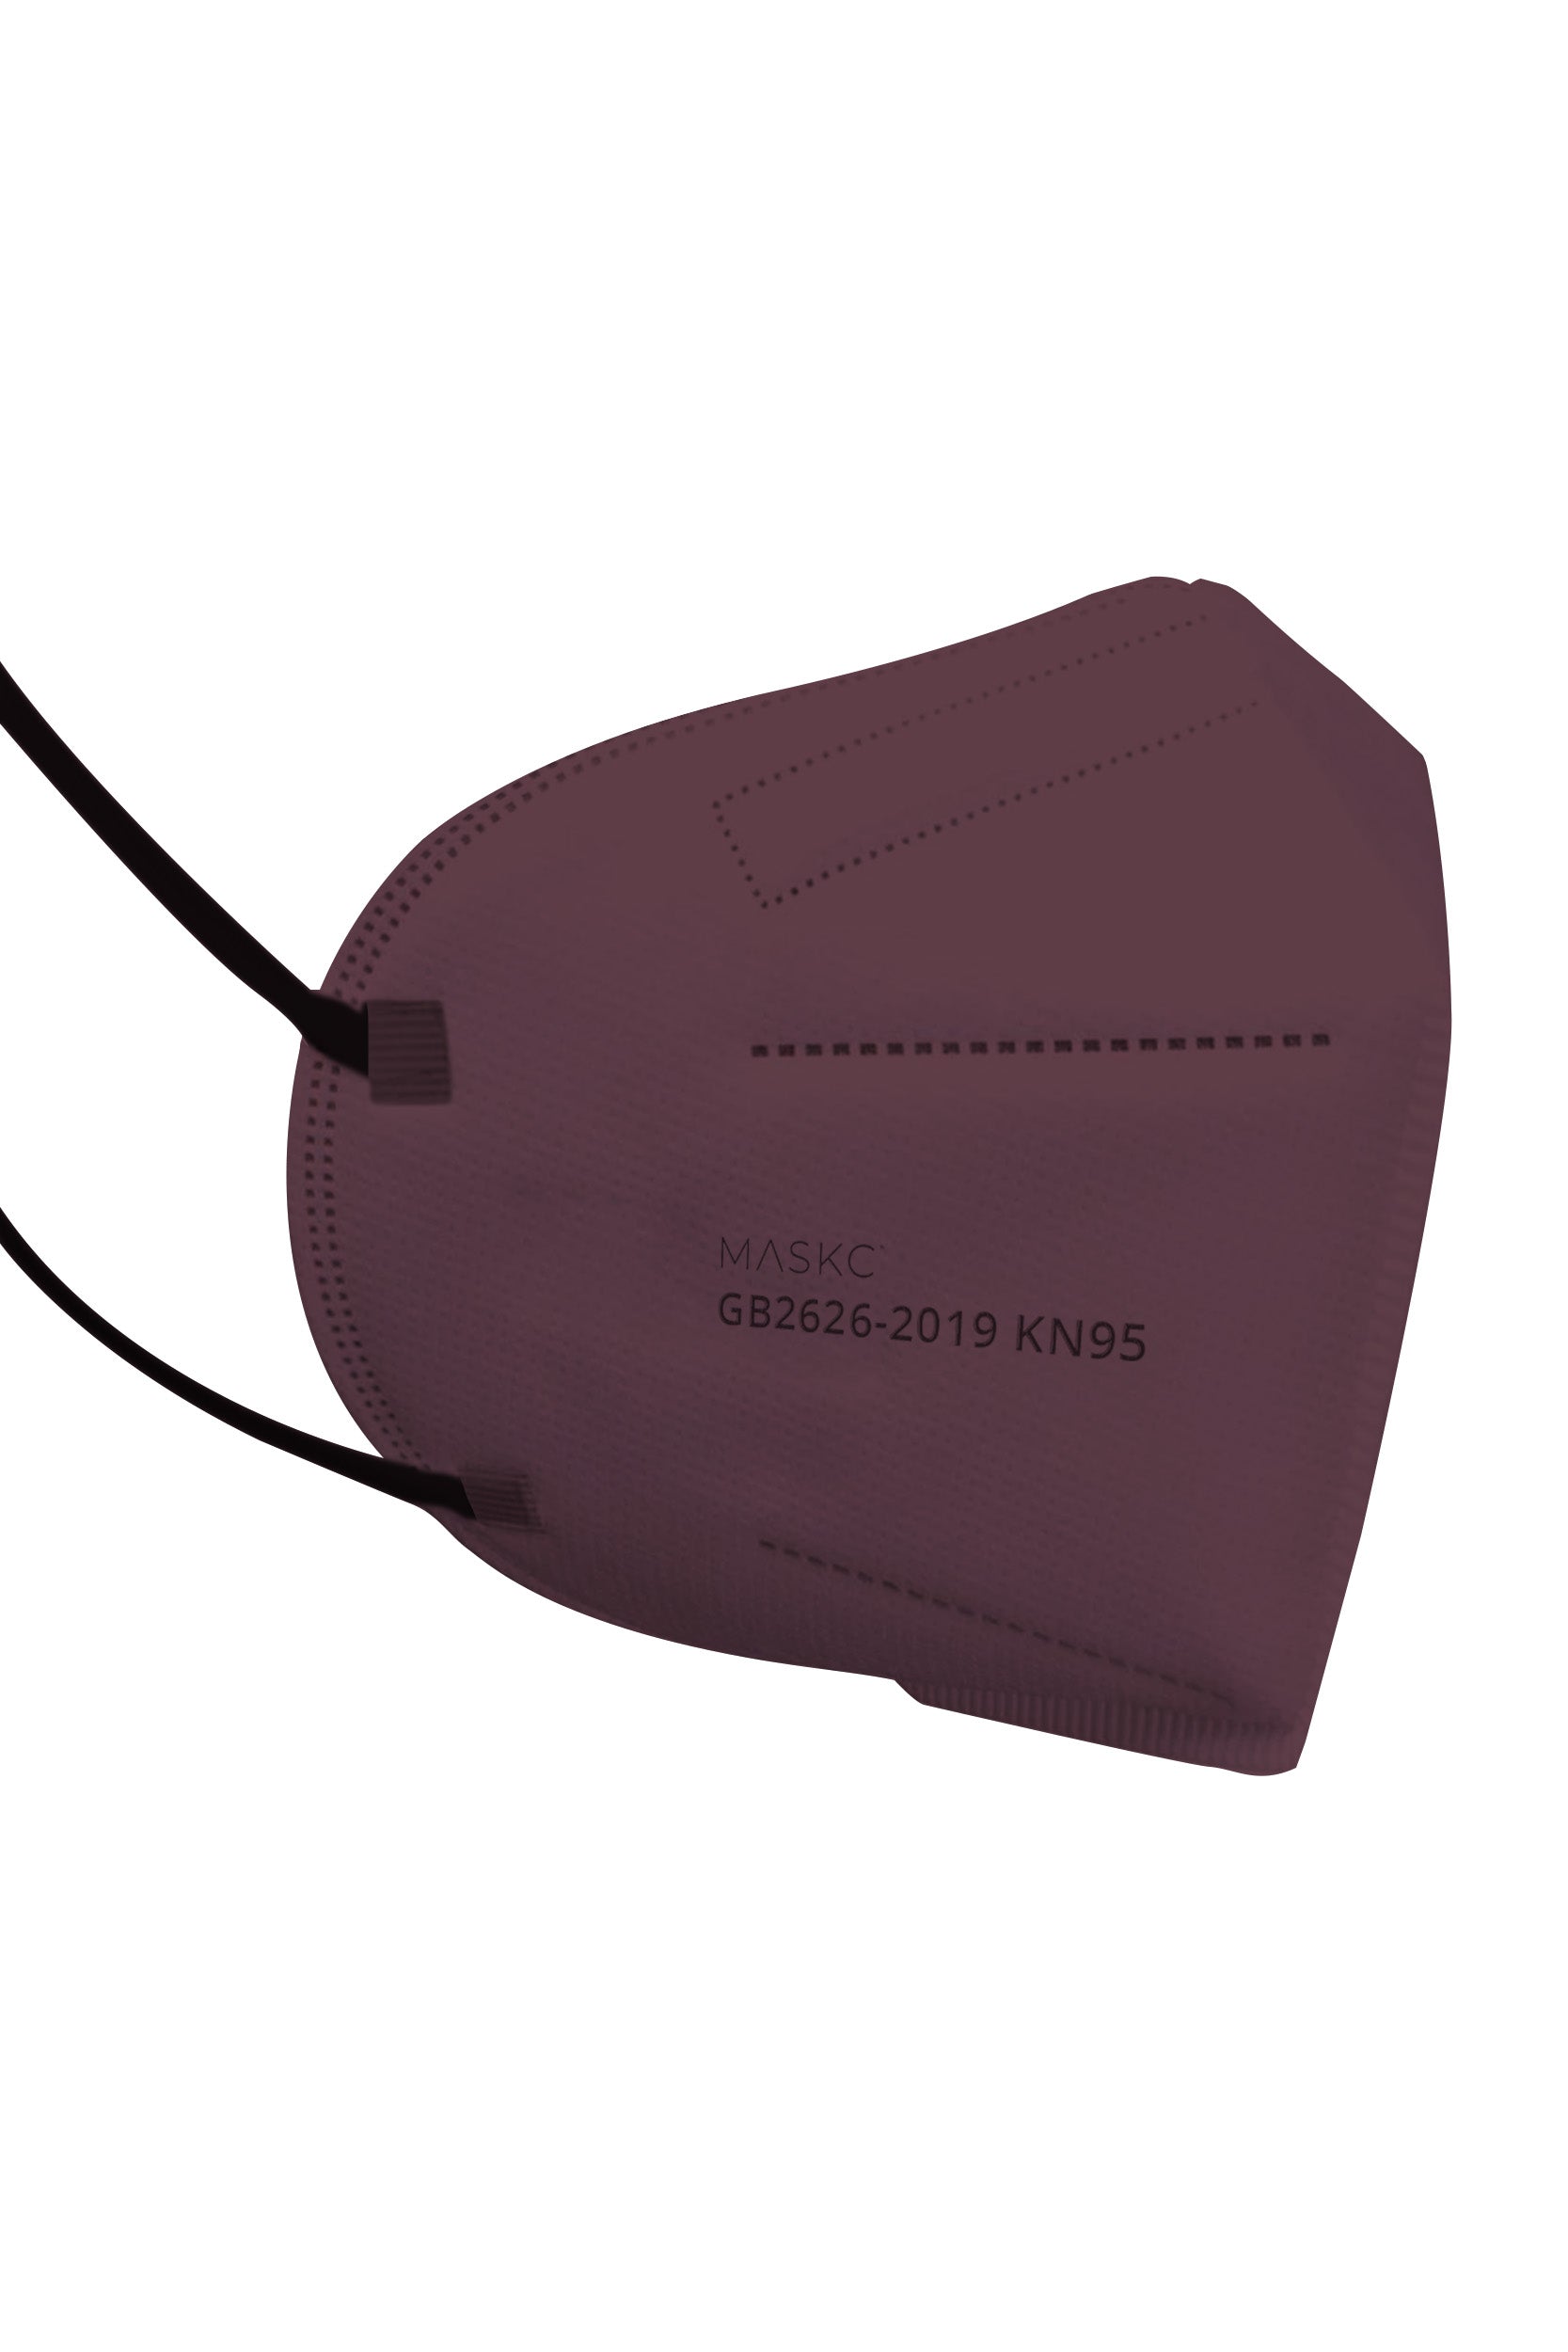 Stylish Dark Purple KN95 face mask with printed pink hearts, with soft black ear loops and high quality fabric. 